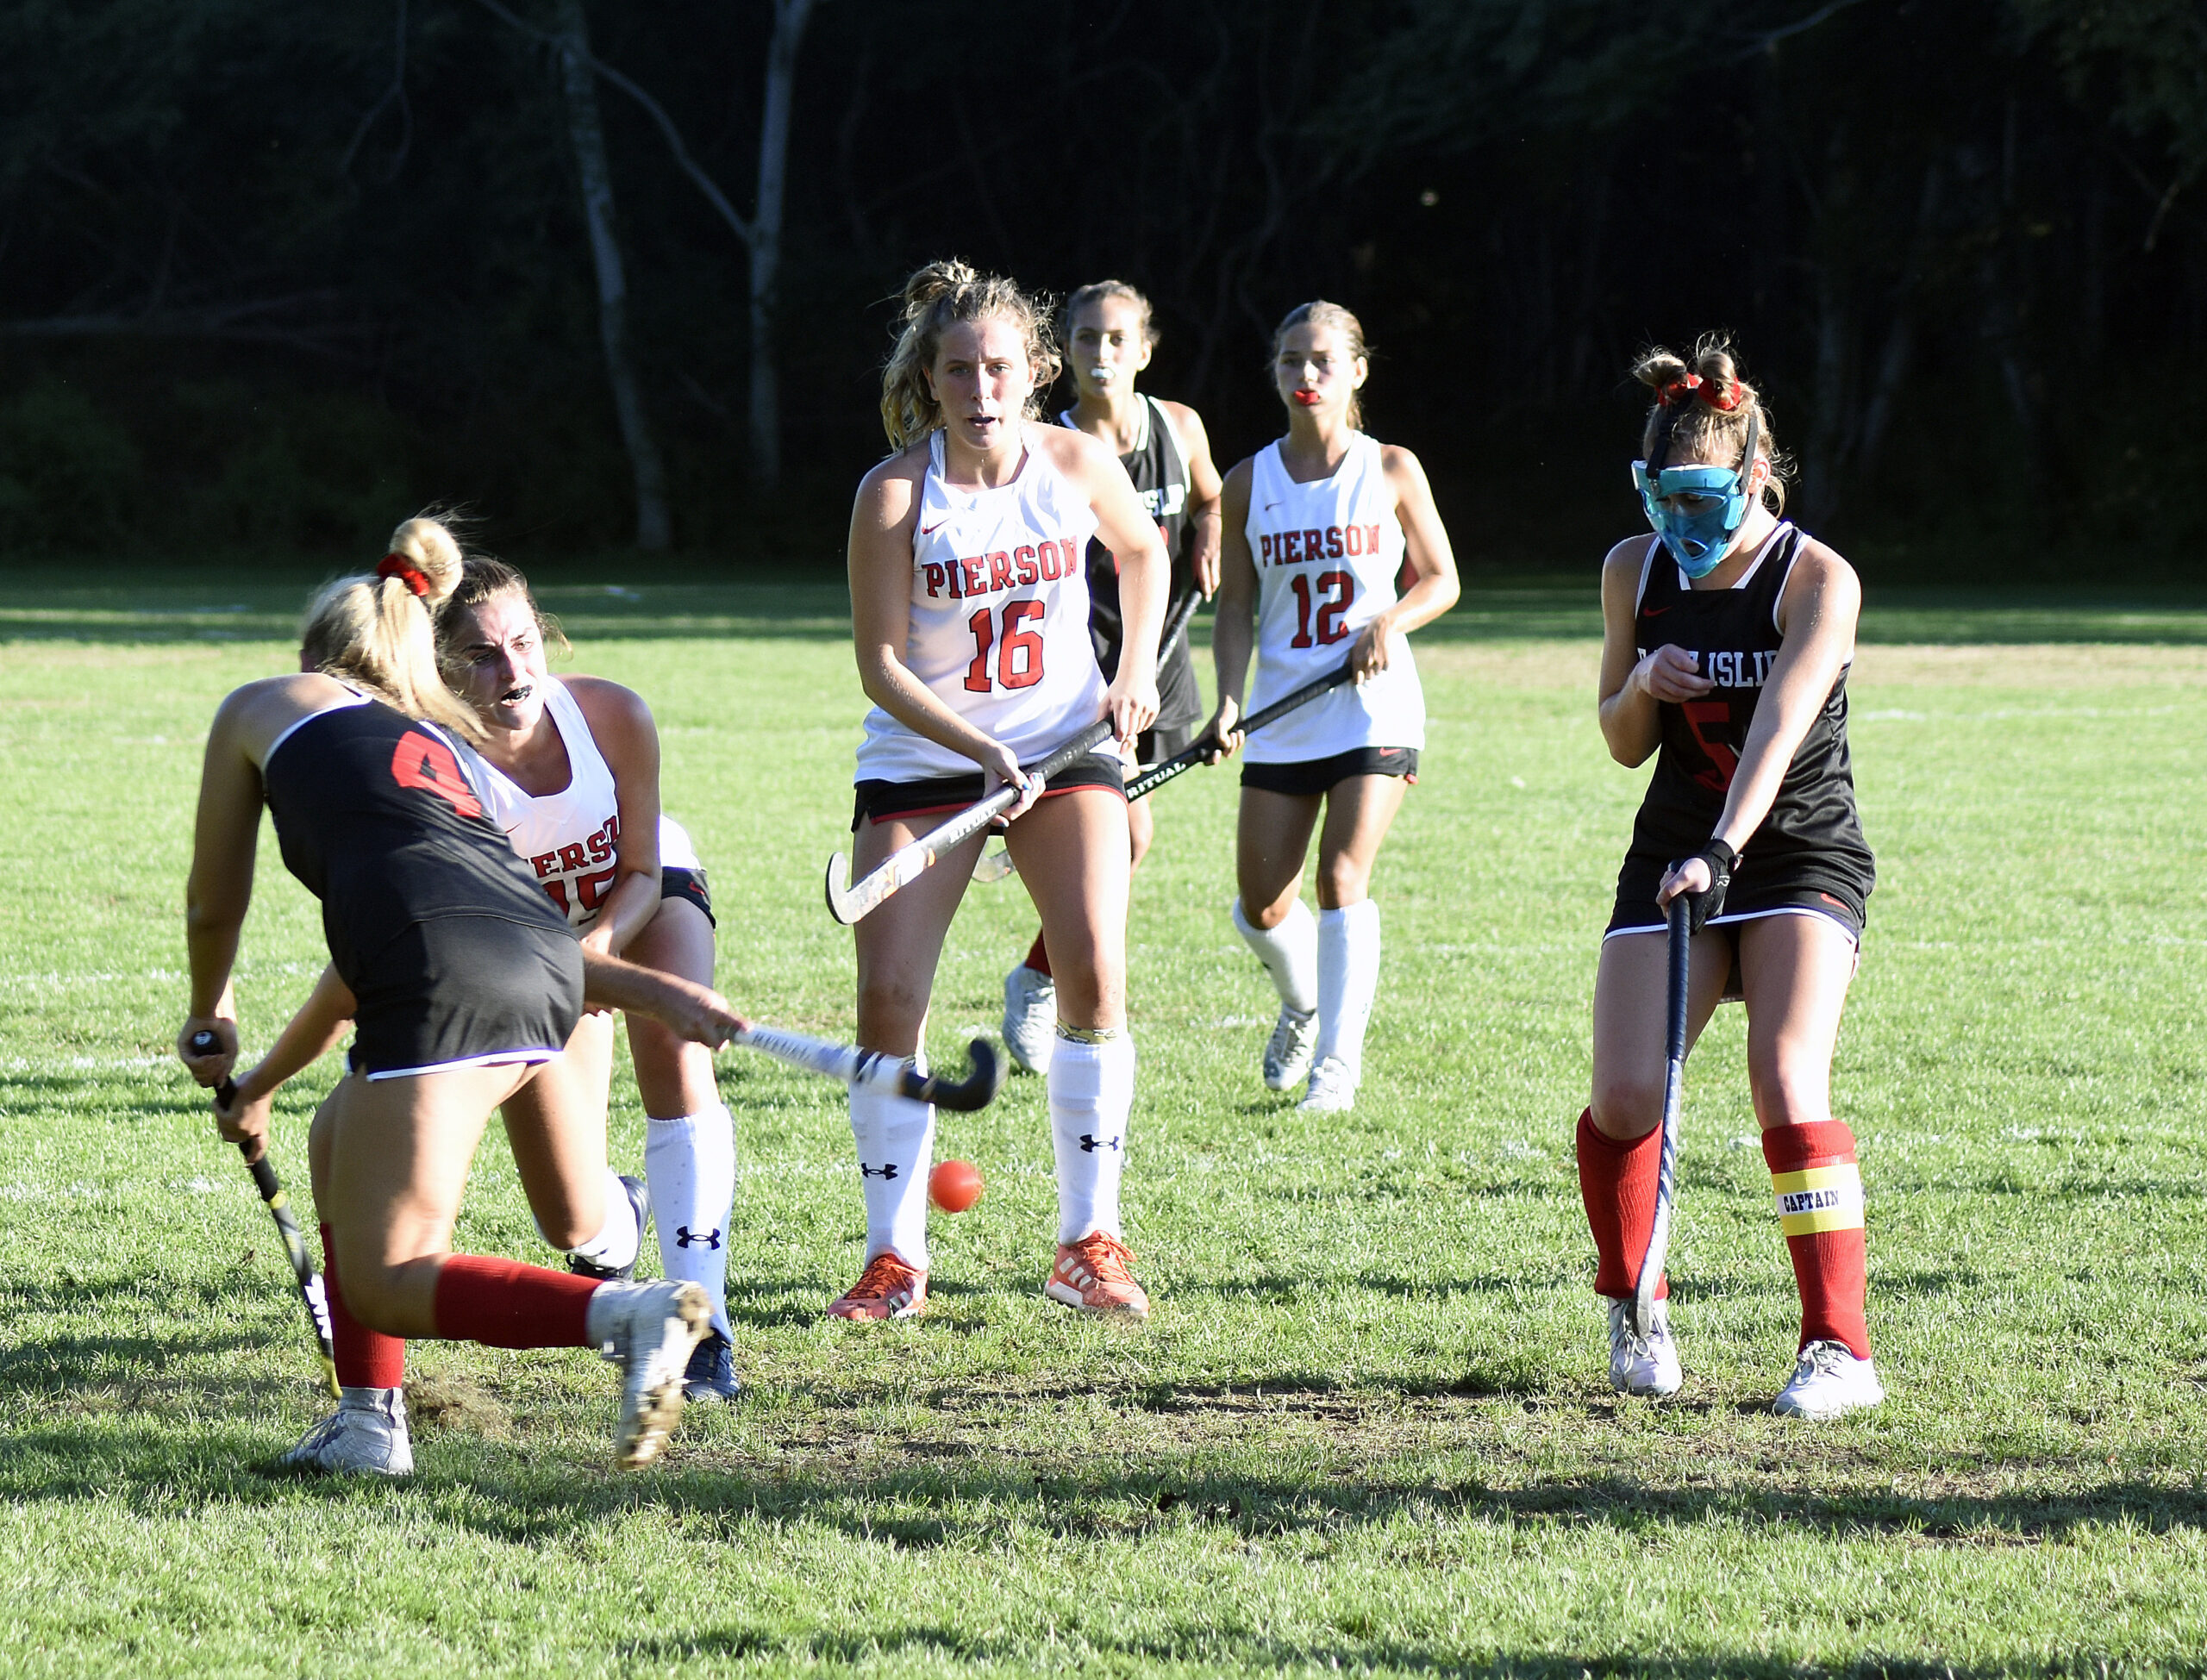 Pierson's Sophia Beech shoots and scores the game-winning goal with 4:39 remaining in the game.   DREW BUDD